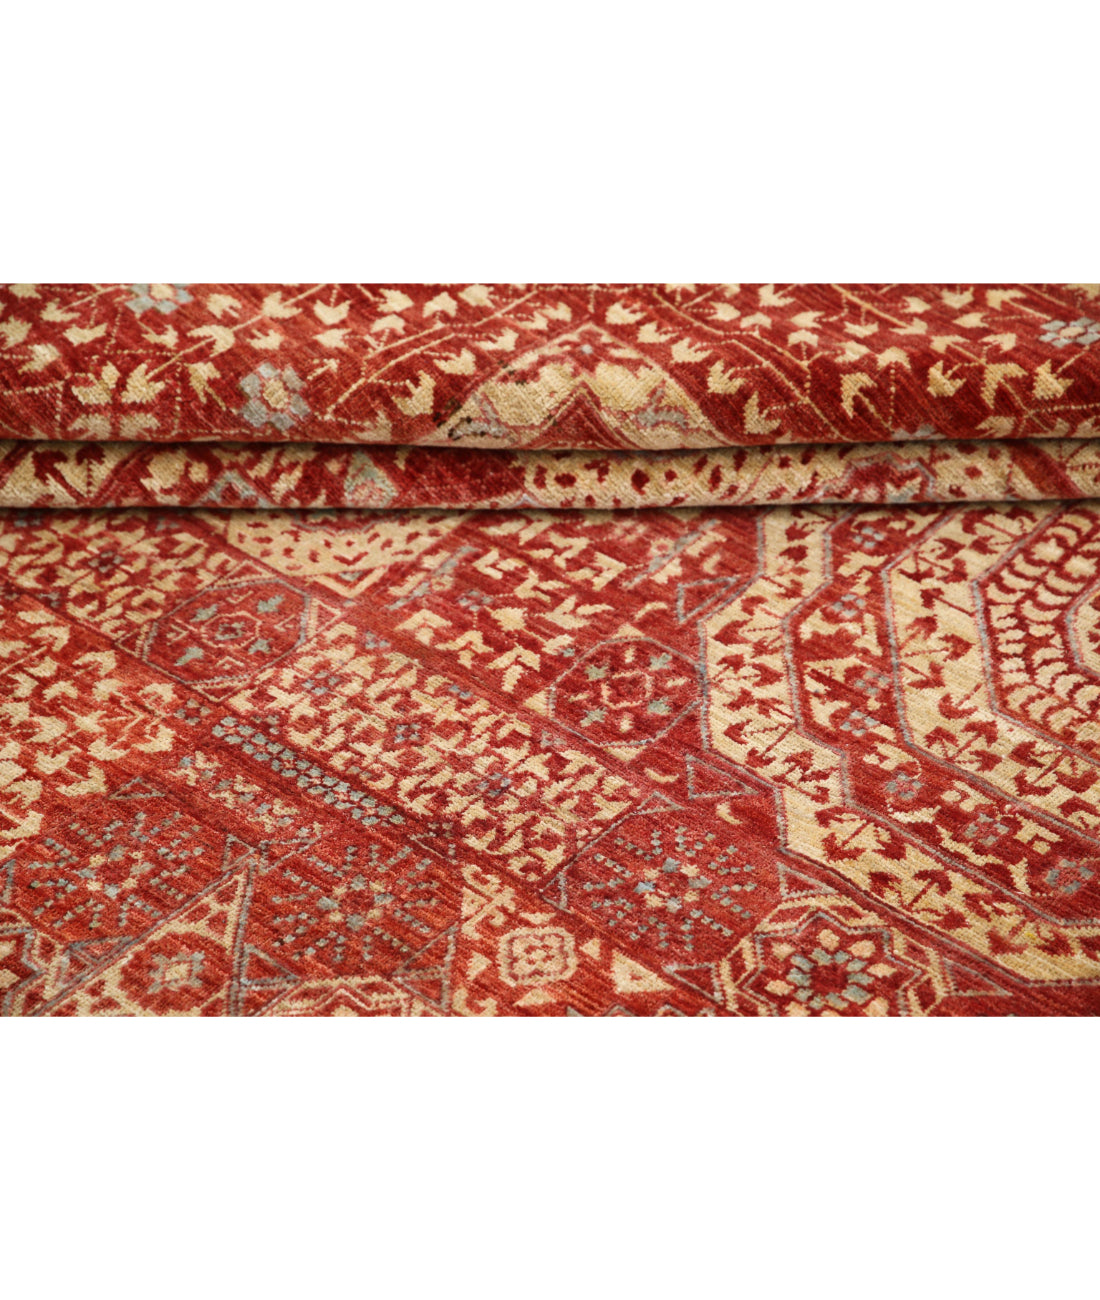 Mamluk 8'6'' X 11'9'' Hand-Knotted Wool Rug 8'6'' x 11'9'' (255 X 353) / Red / Ivory